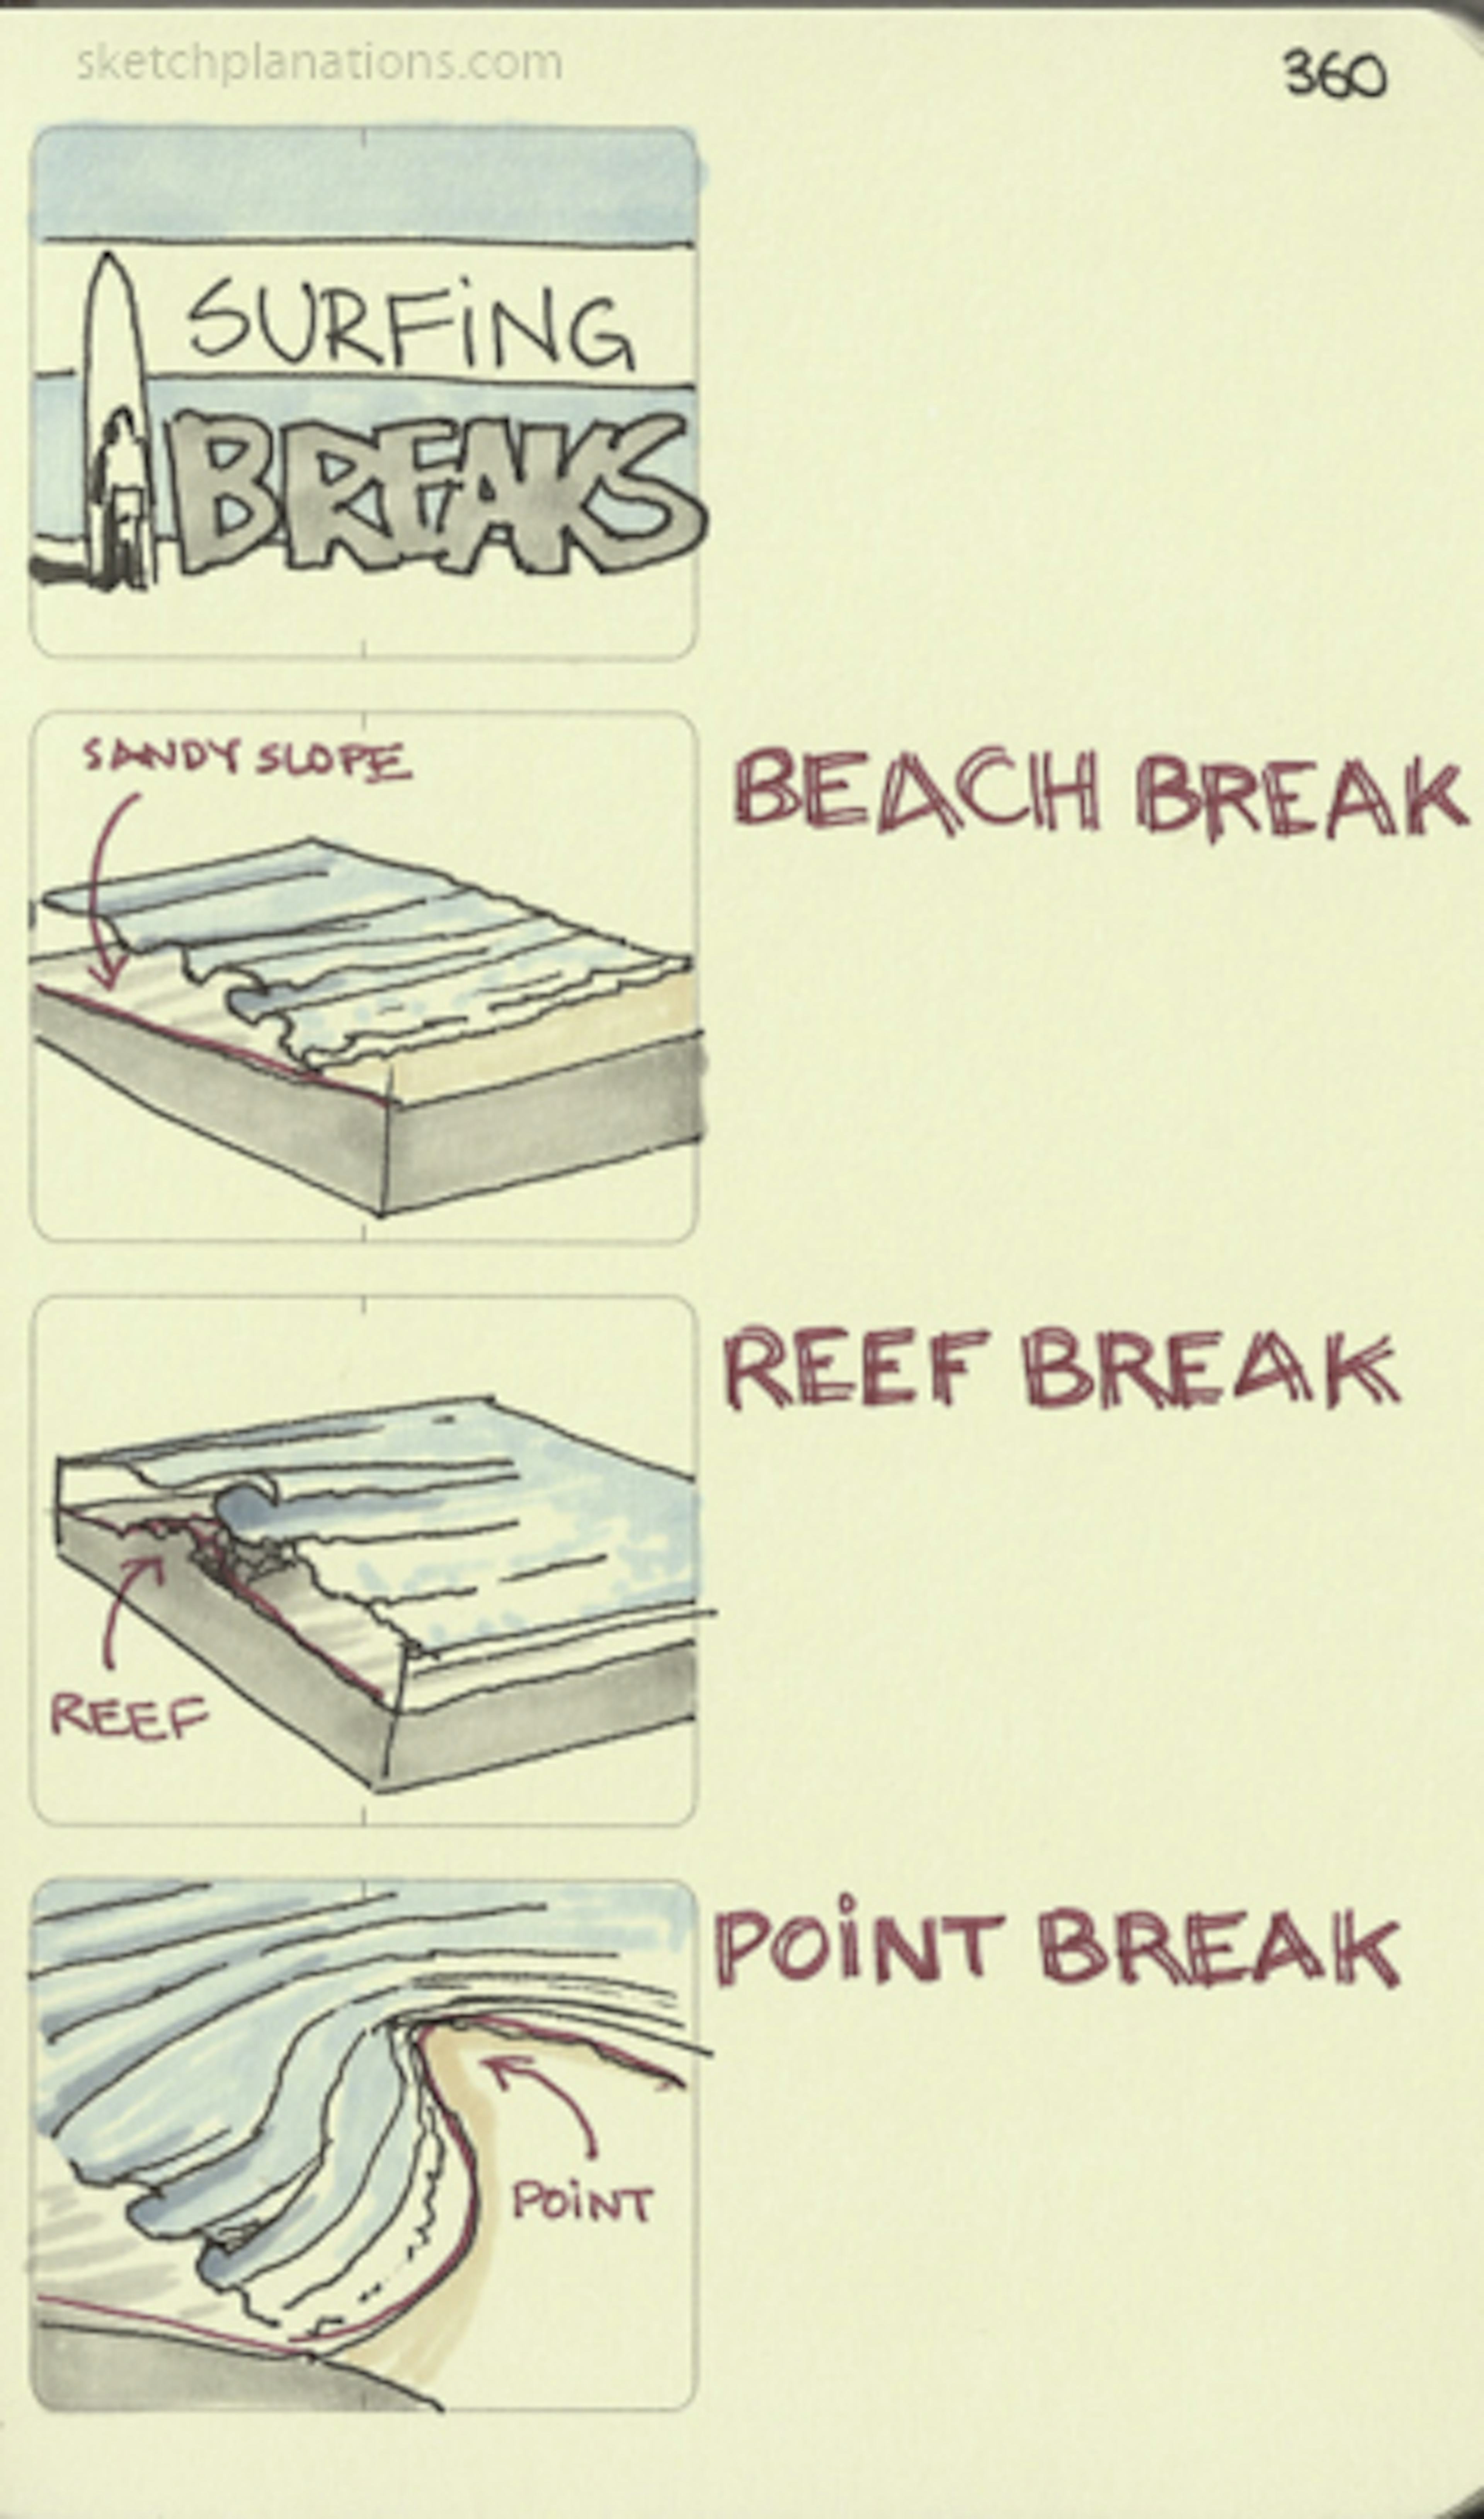 Surfing breaks: Beach, reef and point - Sketchplanations